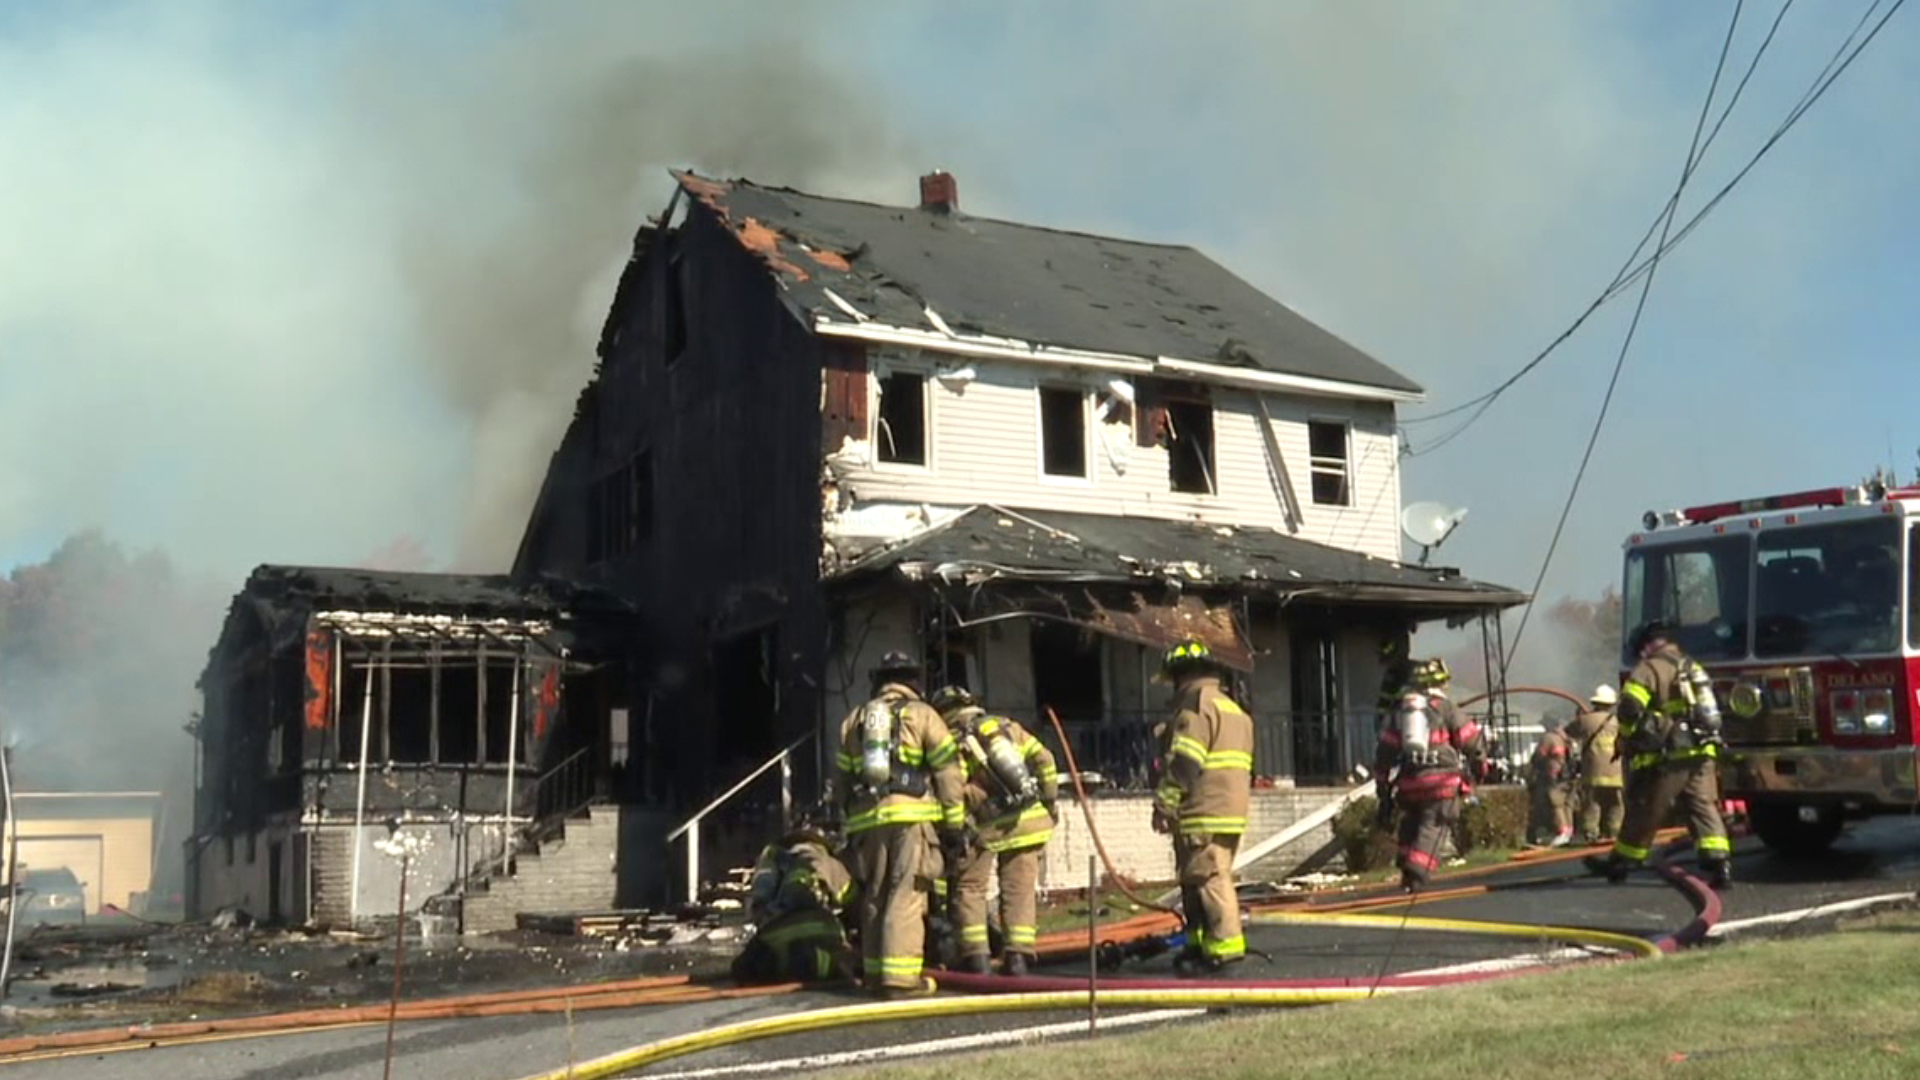 Fire sparked at one home and spread to a neighbor's.